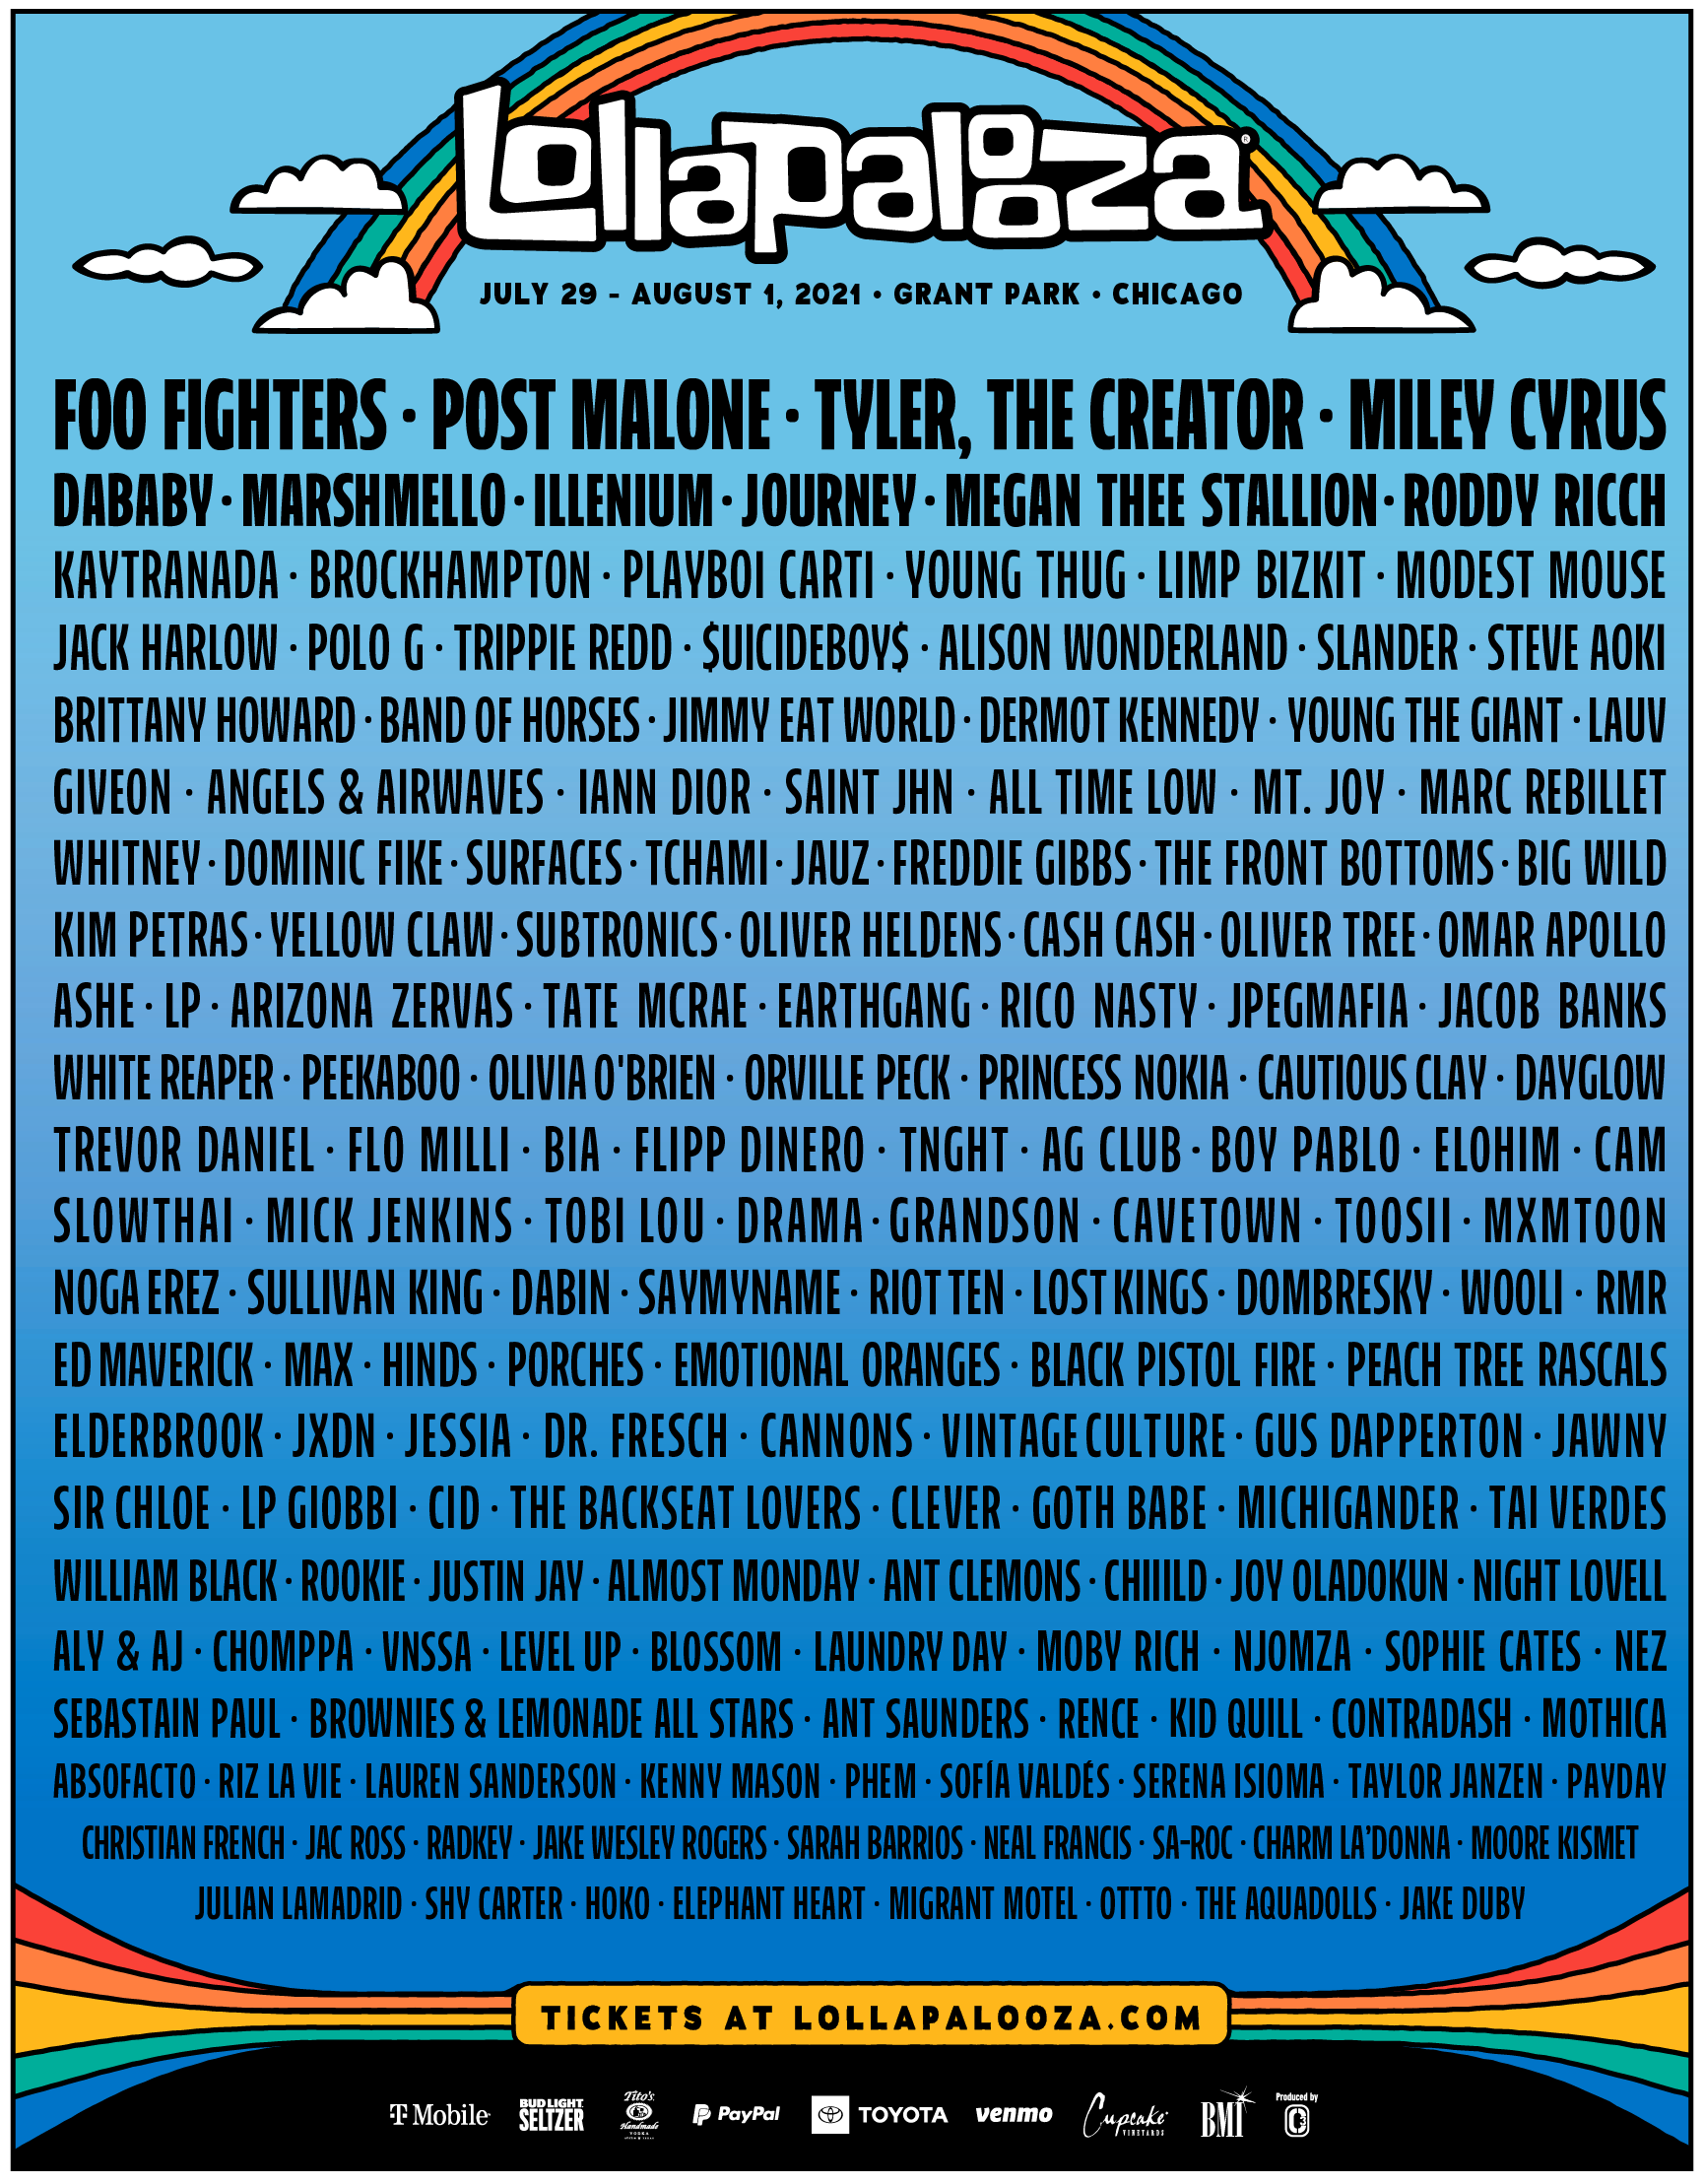 LOLLAPALOOZA IS COMING BACK THIS SUMMER. HERE IS WHAT TO EXPECT. THE